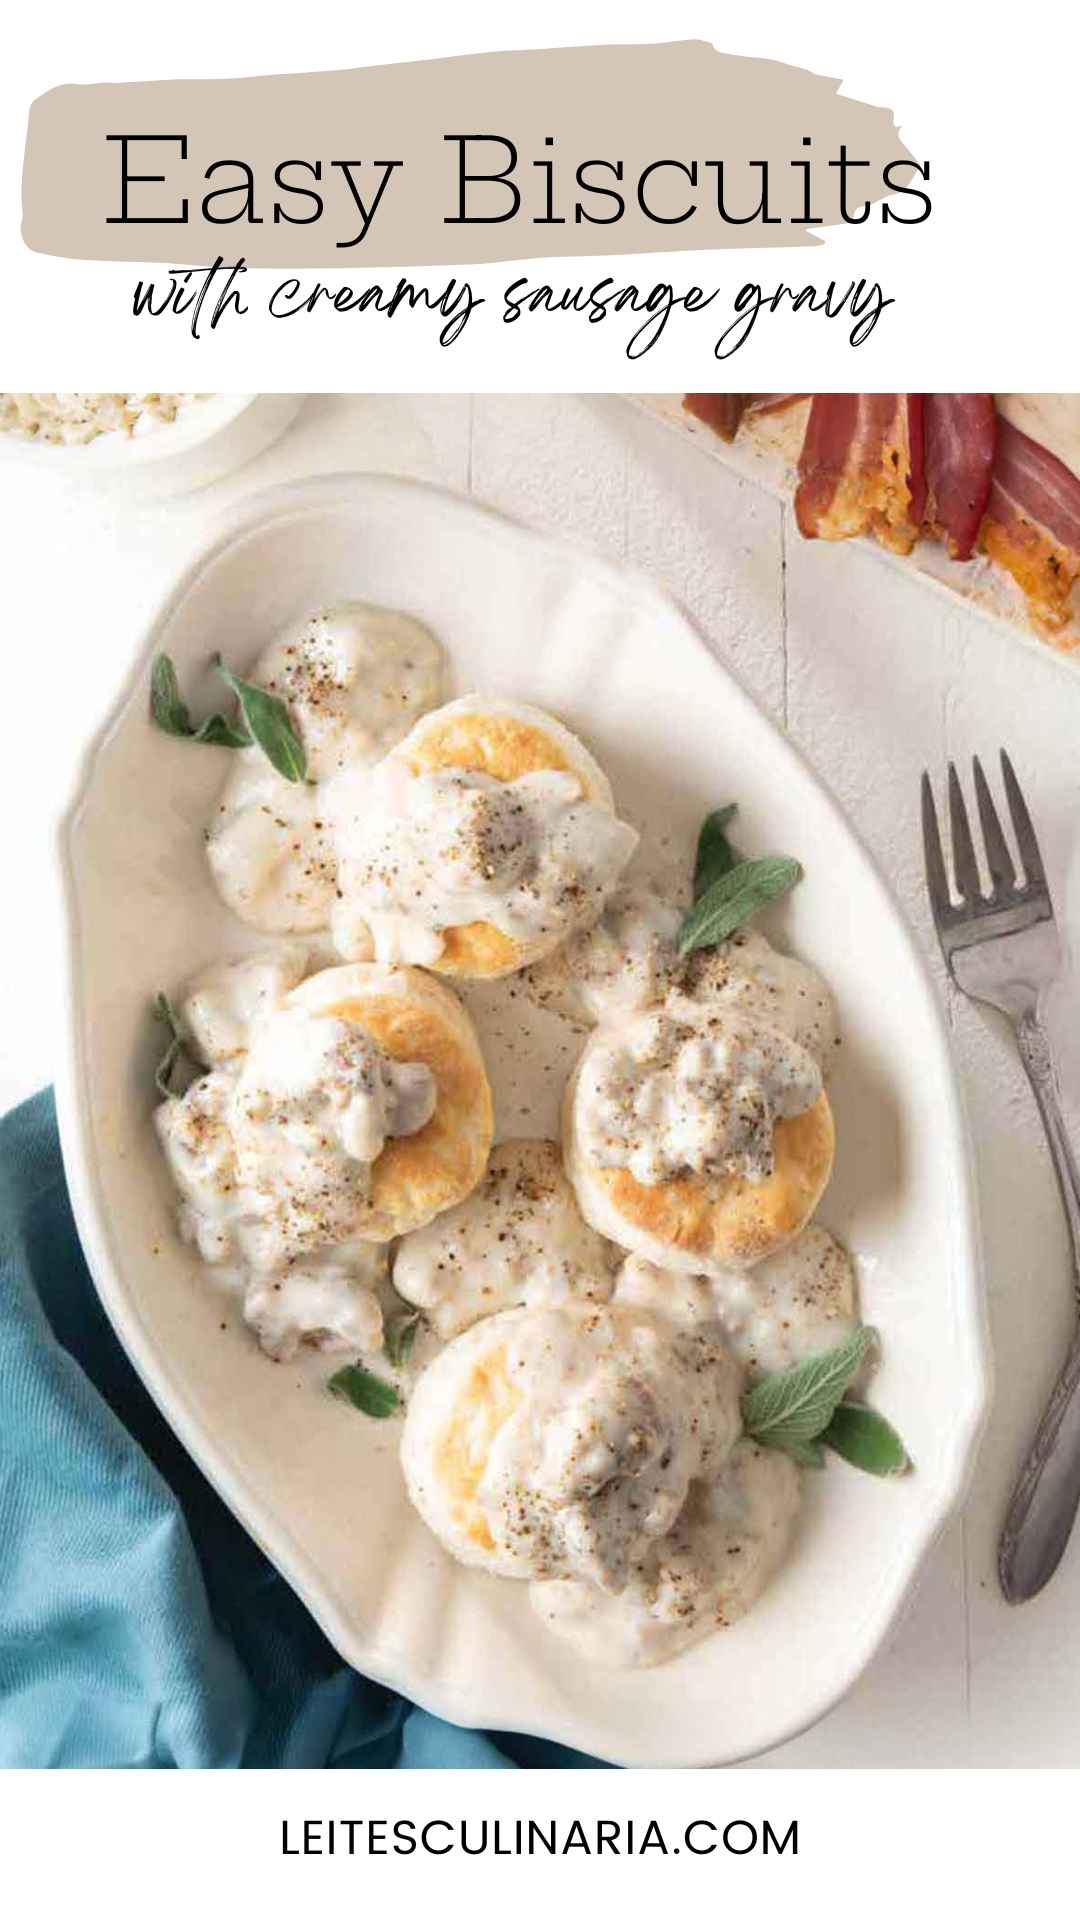 Four fluffy buttermilk biscuits in an oval baking dish, topped with white sausage gravy and fresh sage leaves.